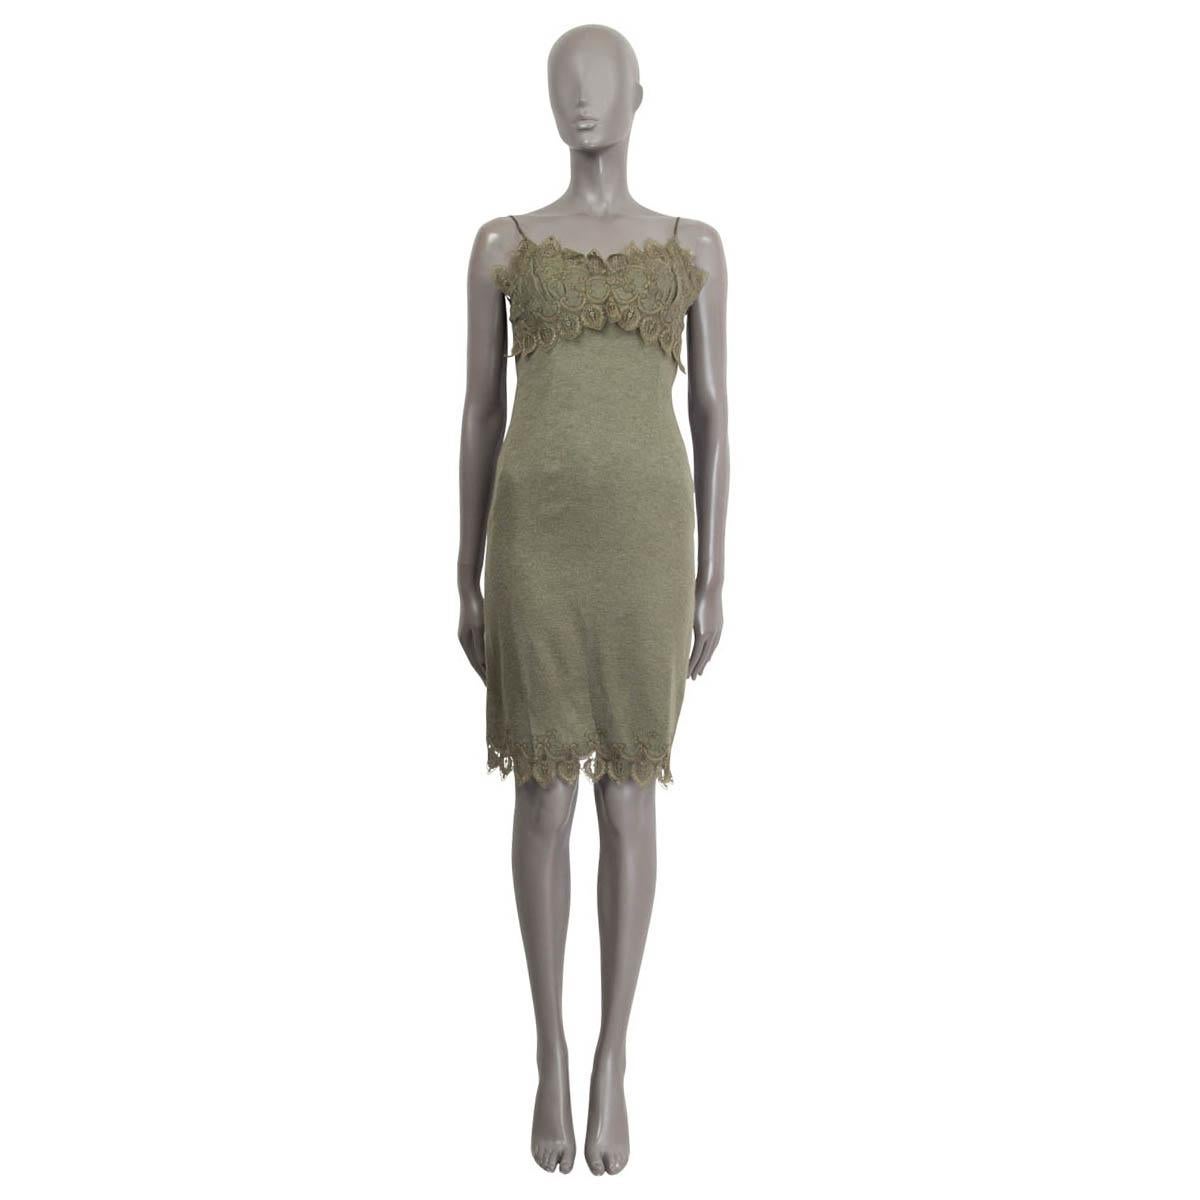 100% authentic Ermanno Scervino sleeveless slip dress in olive green wool (assumed because tag is missing) dress. Embellished with olive green lace around the bust and the hemline. Opens with a concealed zipper on the back. Lined in silk (assumed